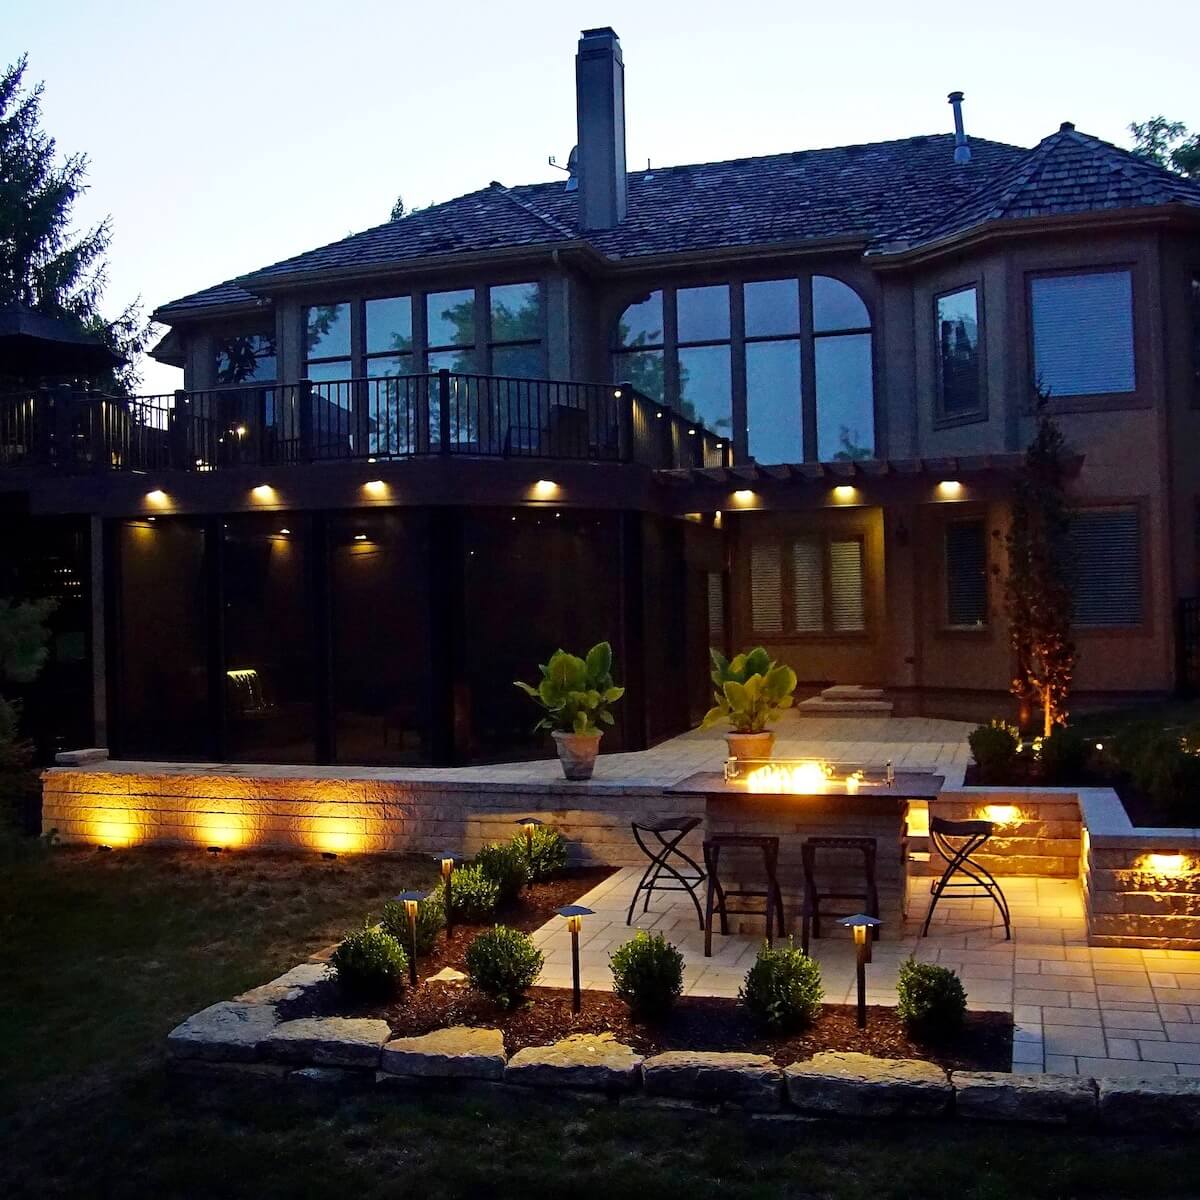 6 Amazing Landscape Lighting Ideas For Your Patio and Backyard